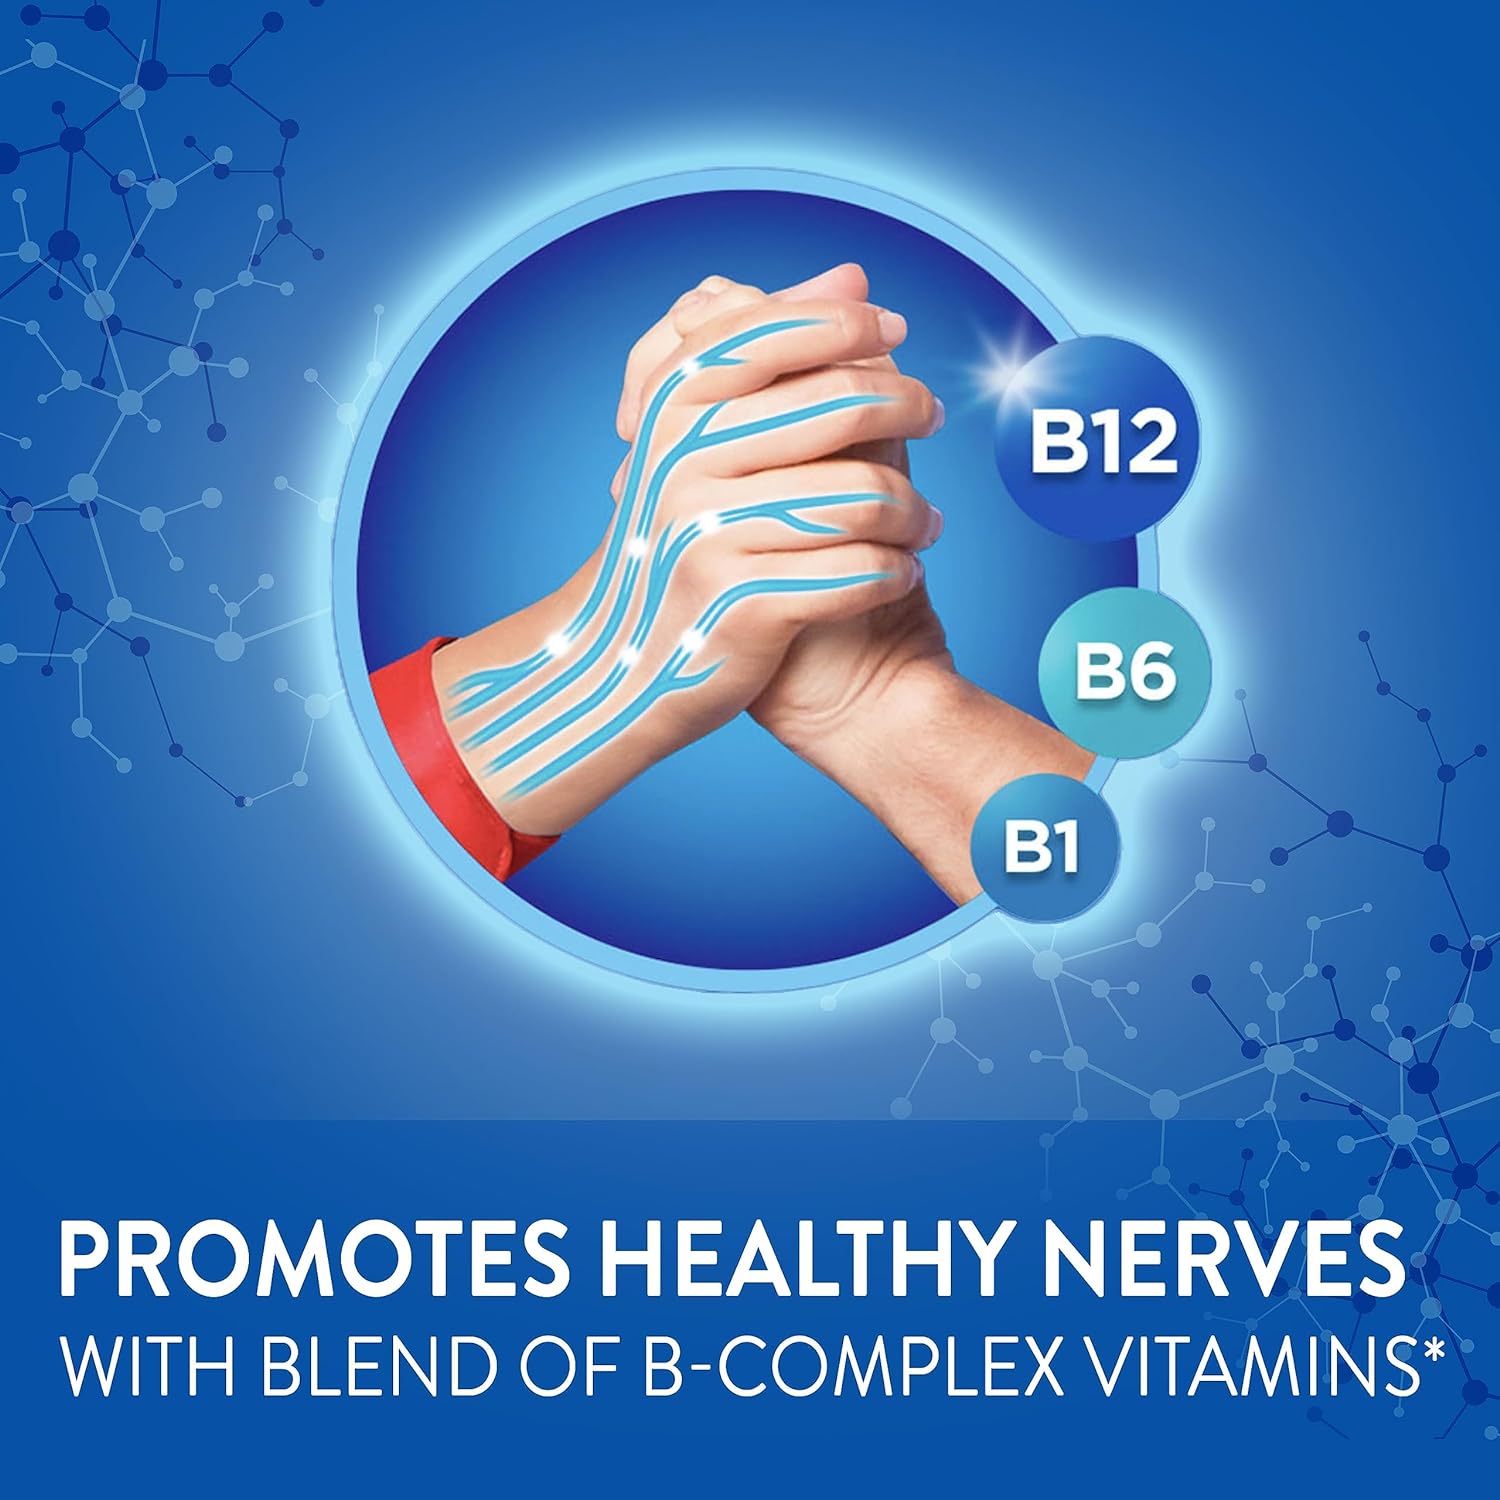 Nervive Nerve Relief PM, with Alpha Lipoic Acid, to help Reduce Nerve Aches, Weakness, & Discomfort in Fingers, Hands, Toes & Feet*†, Vitamins B1&B6, Melatonin, Chamomile, Lavender, 30 Nightly Tablets : Health & Household